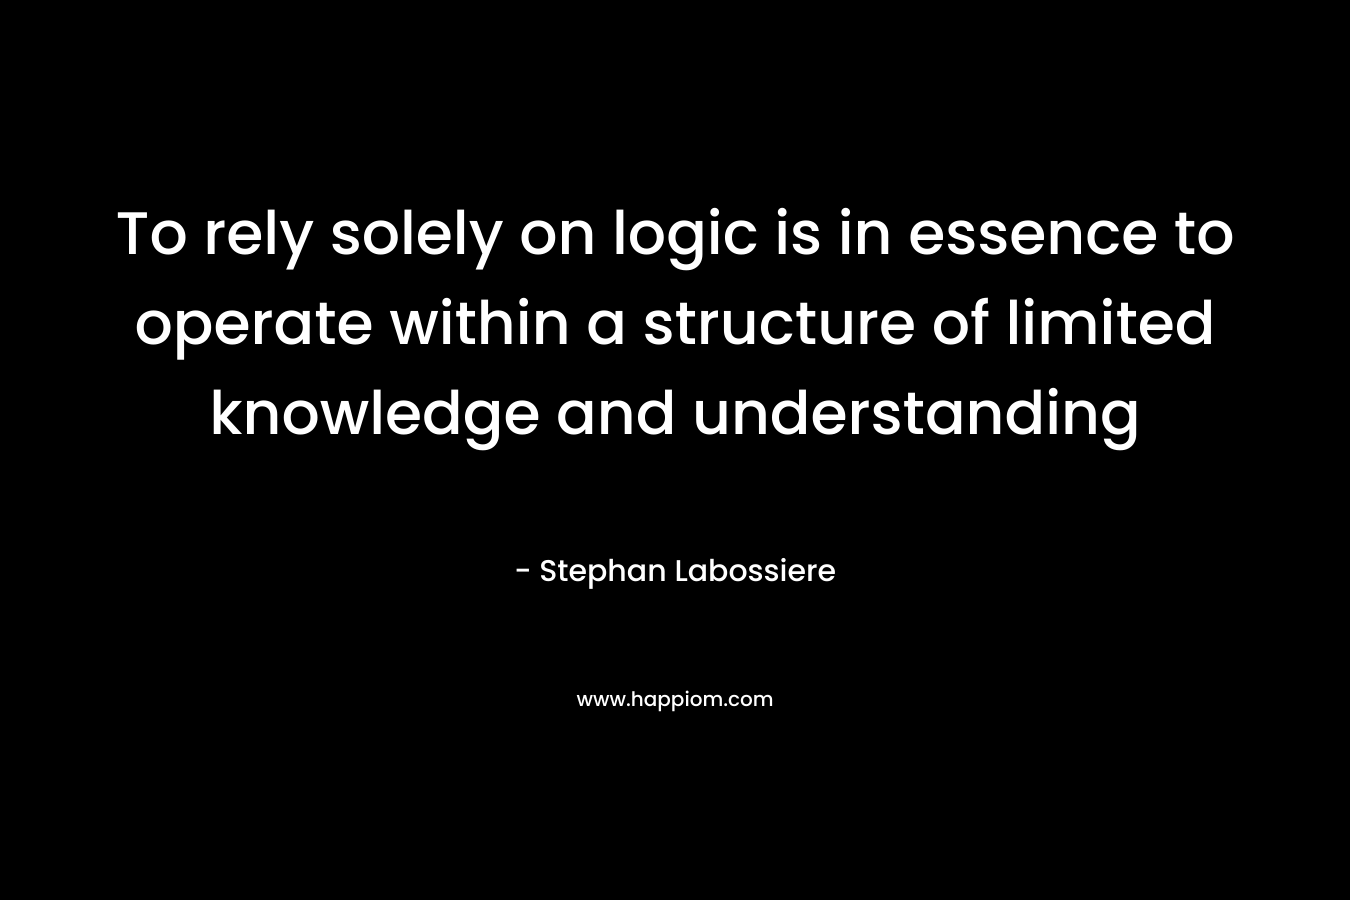 To rely solely on logic is in essence to operate within a structure of limited knowledge and understanding – Stephan Labossiere